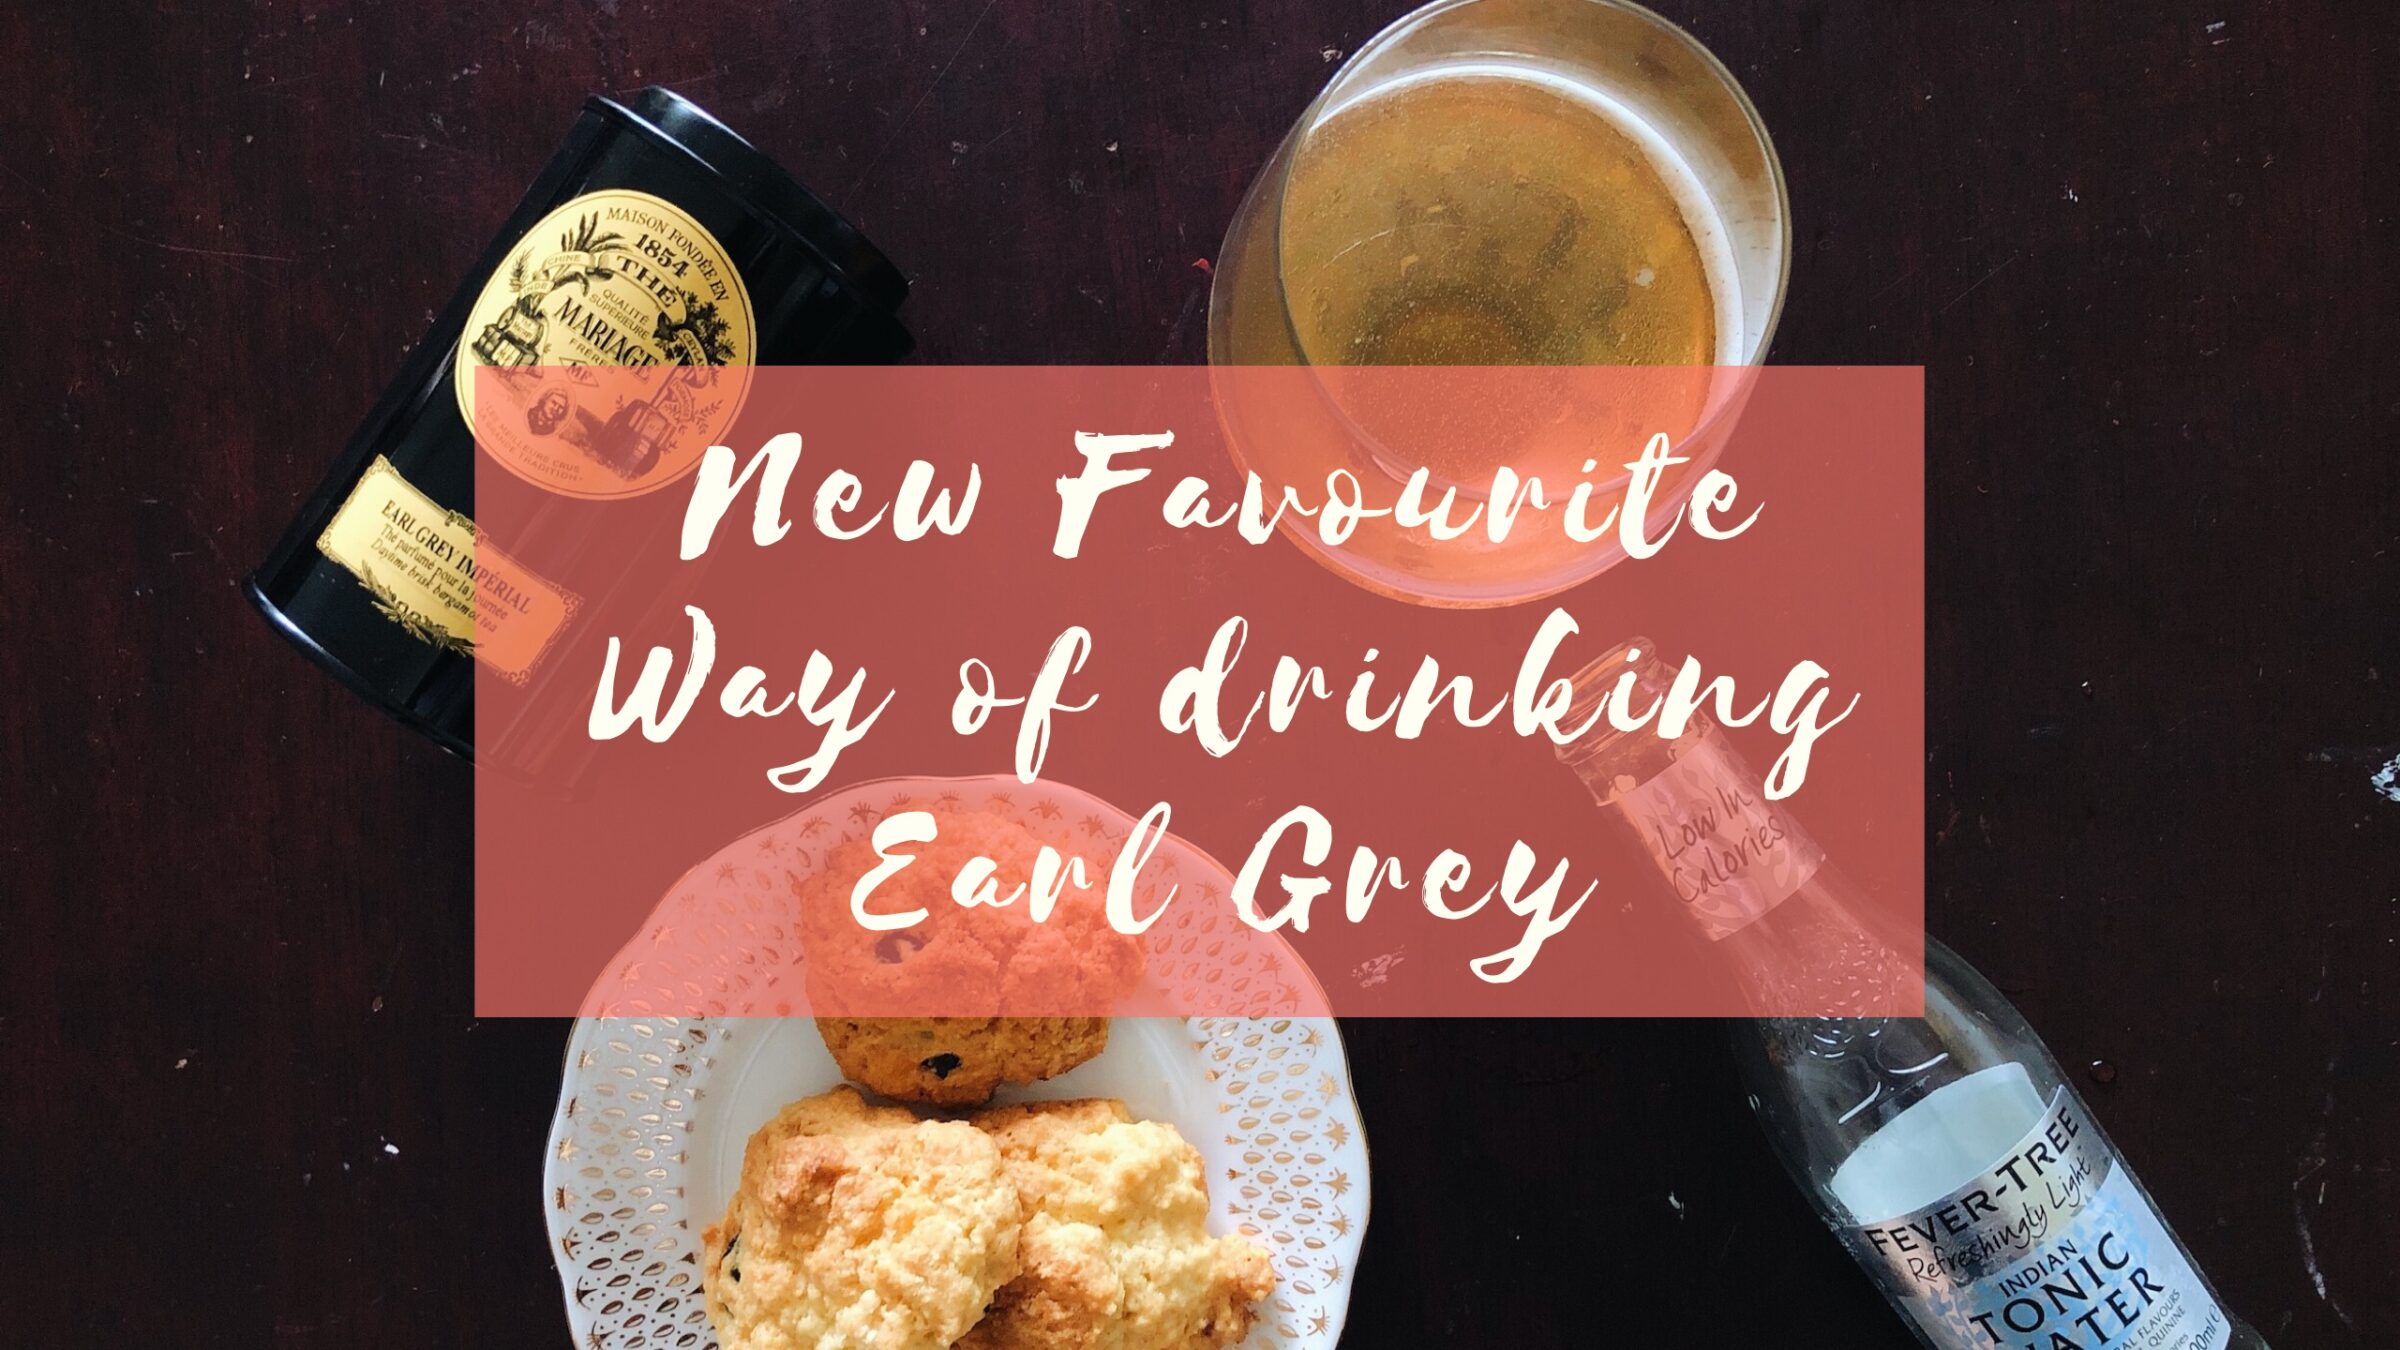 This may be my favourite way of drinking Earl Grey – Eustea Reads